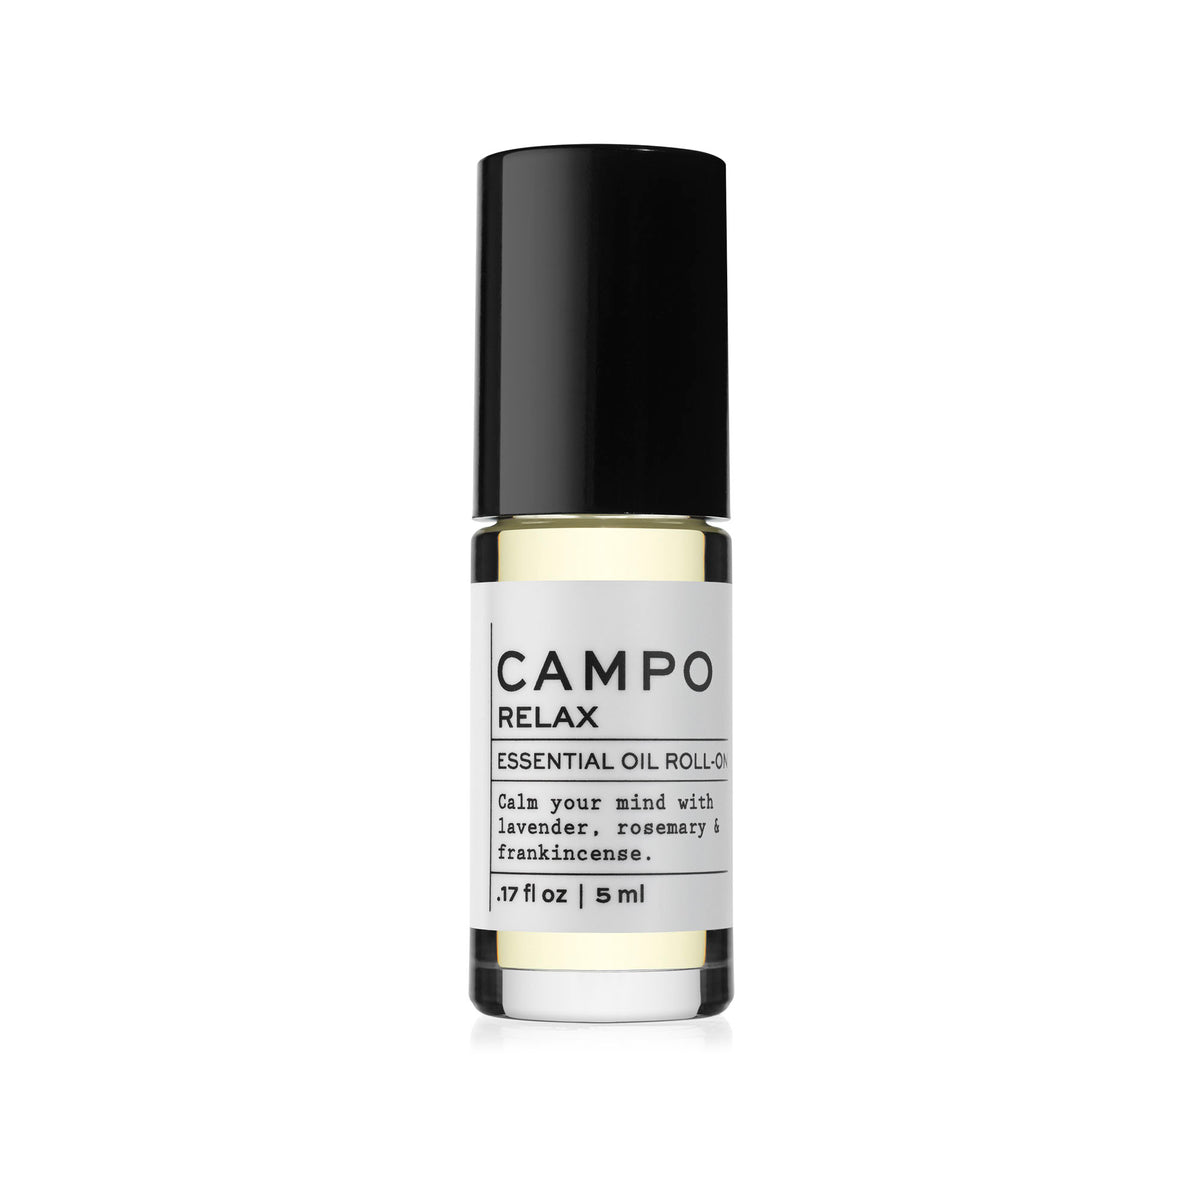 Campo Beauty Essential Oil RELAX Stretch Mark Relief Blend Roll-On that in 5 ml. Soothe sore muscles and pain. Dispels feelings of stress and anxiety to promote deep relaxation. Calm your mind and body naturally with this 100% natural essential oil roll-on blend of Lavender, Rosemary, Frankincense, Neroli Orange Blossom, Sweet Orange, and Bitter Orange.